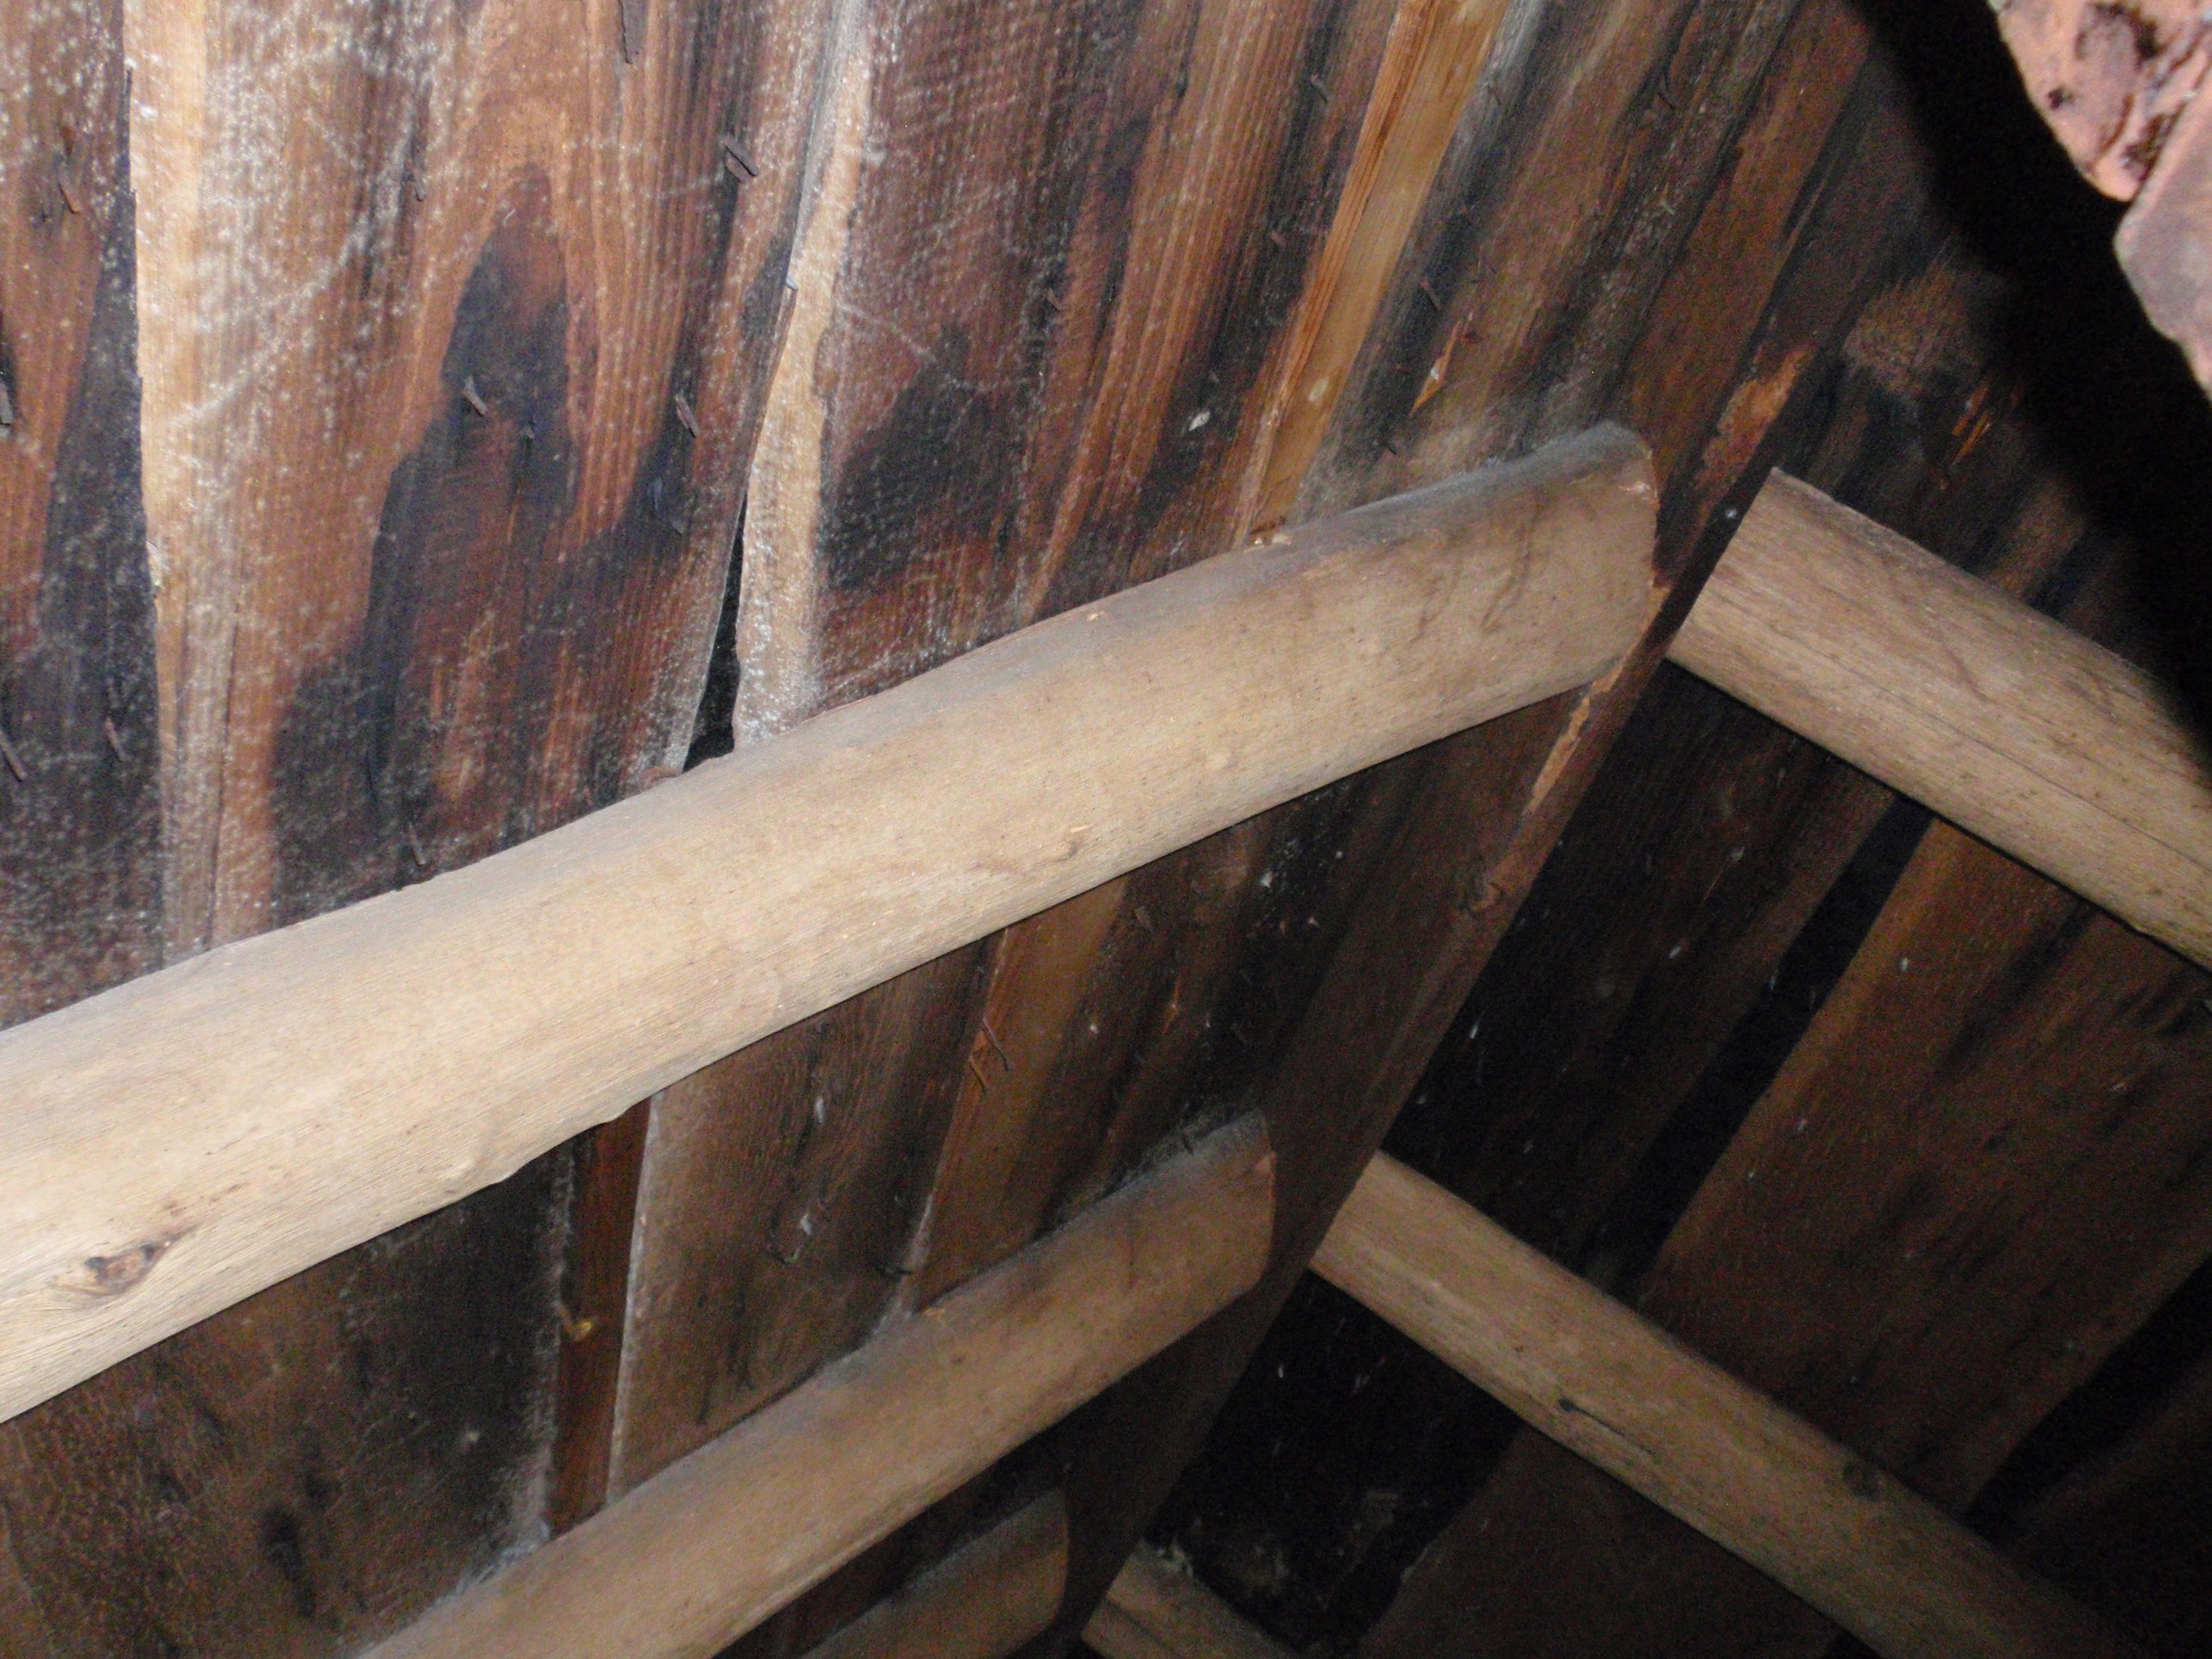  Another clue to the building's construction date is its framing. The framing members are smaller than those from the 18th century. Here in the attic/crawl space, the rafters are joined to a ridgeboard at the peak of the roof. Before about 1820, this